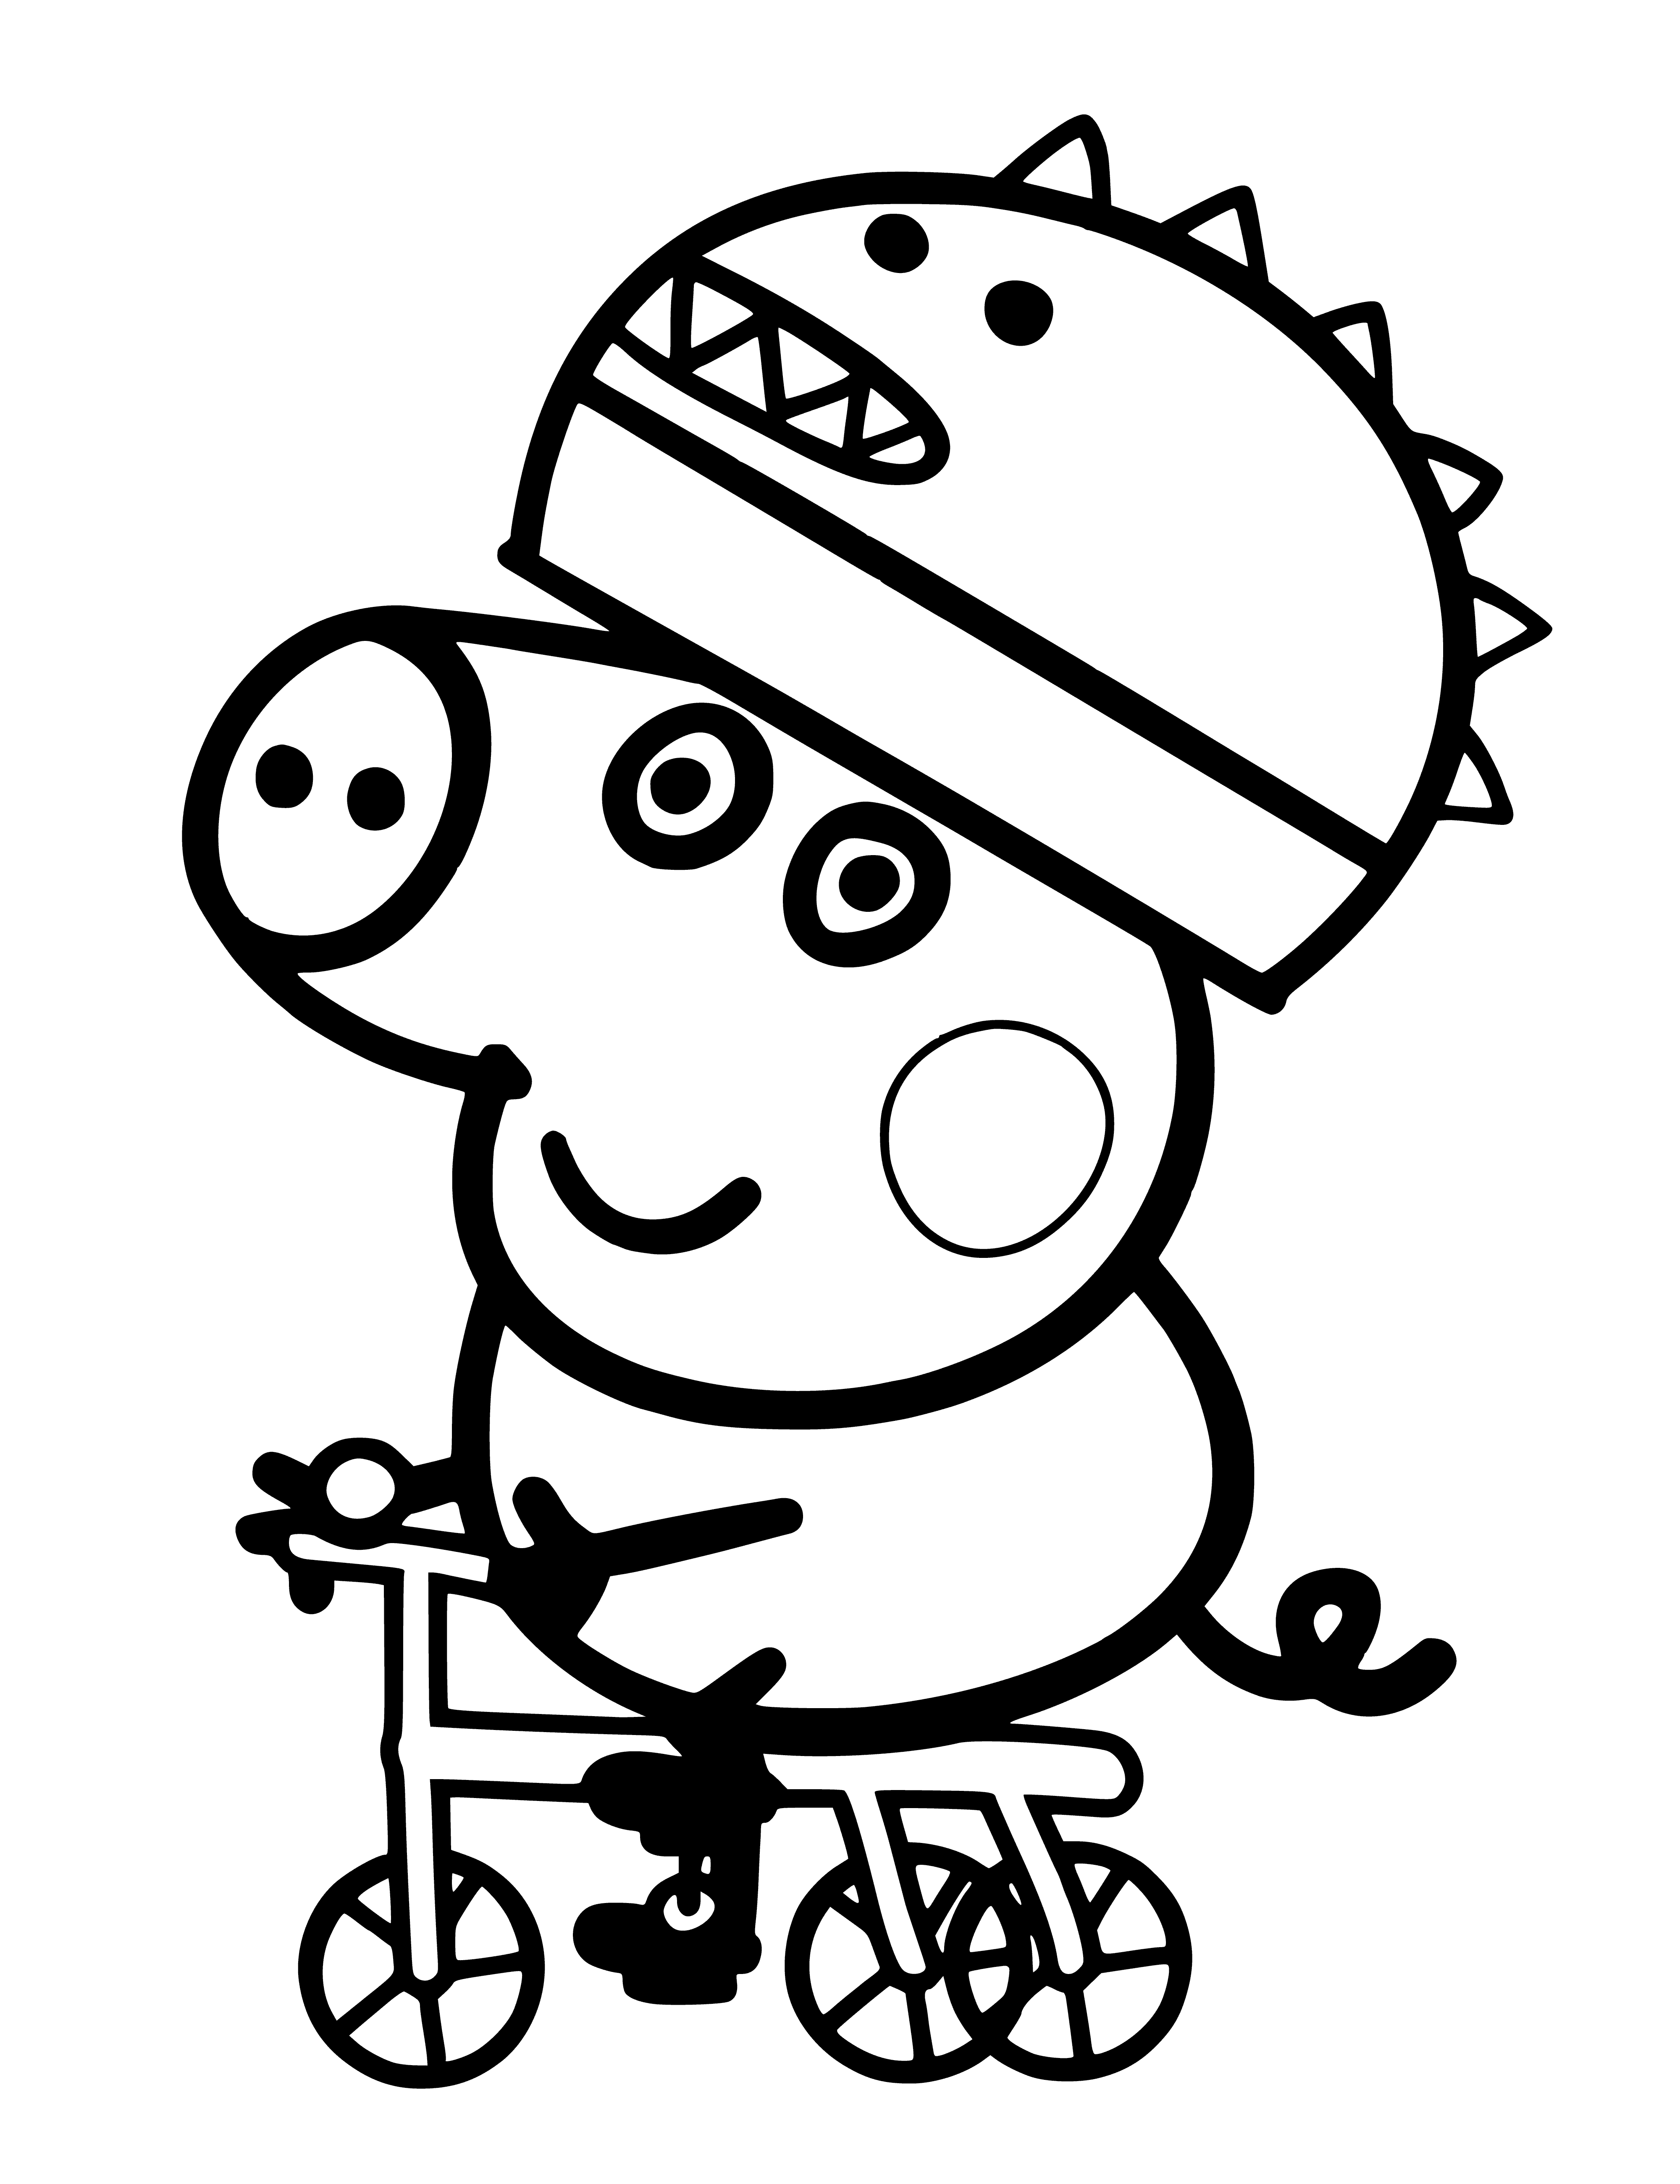 George on a bike coloring page